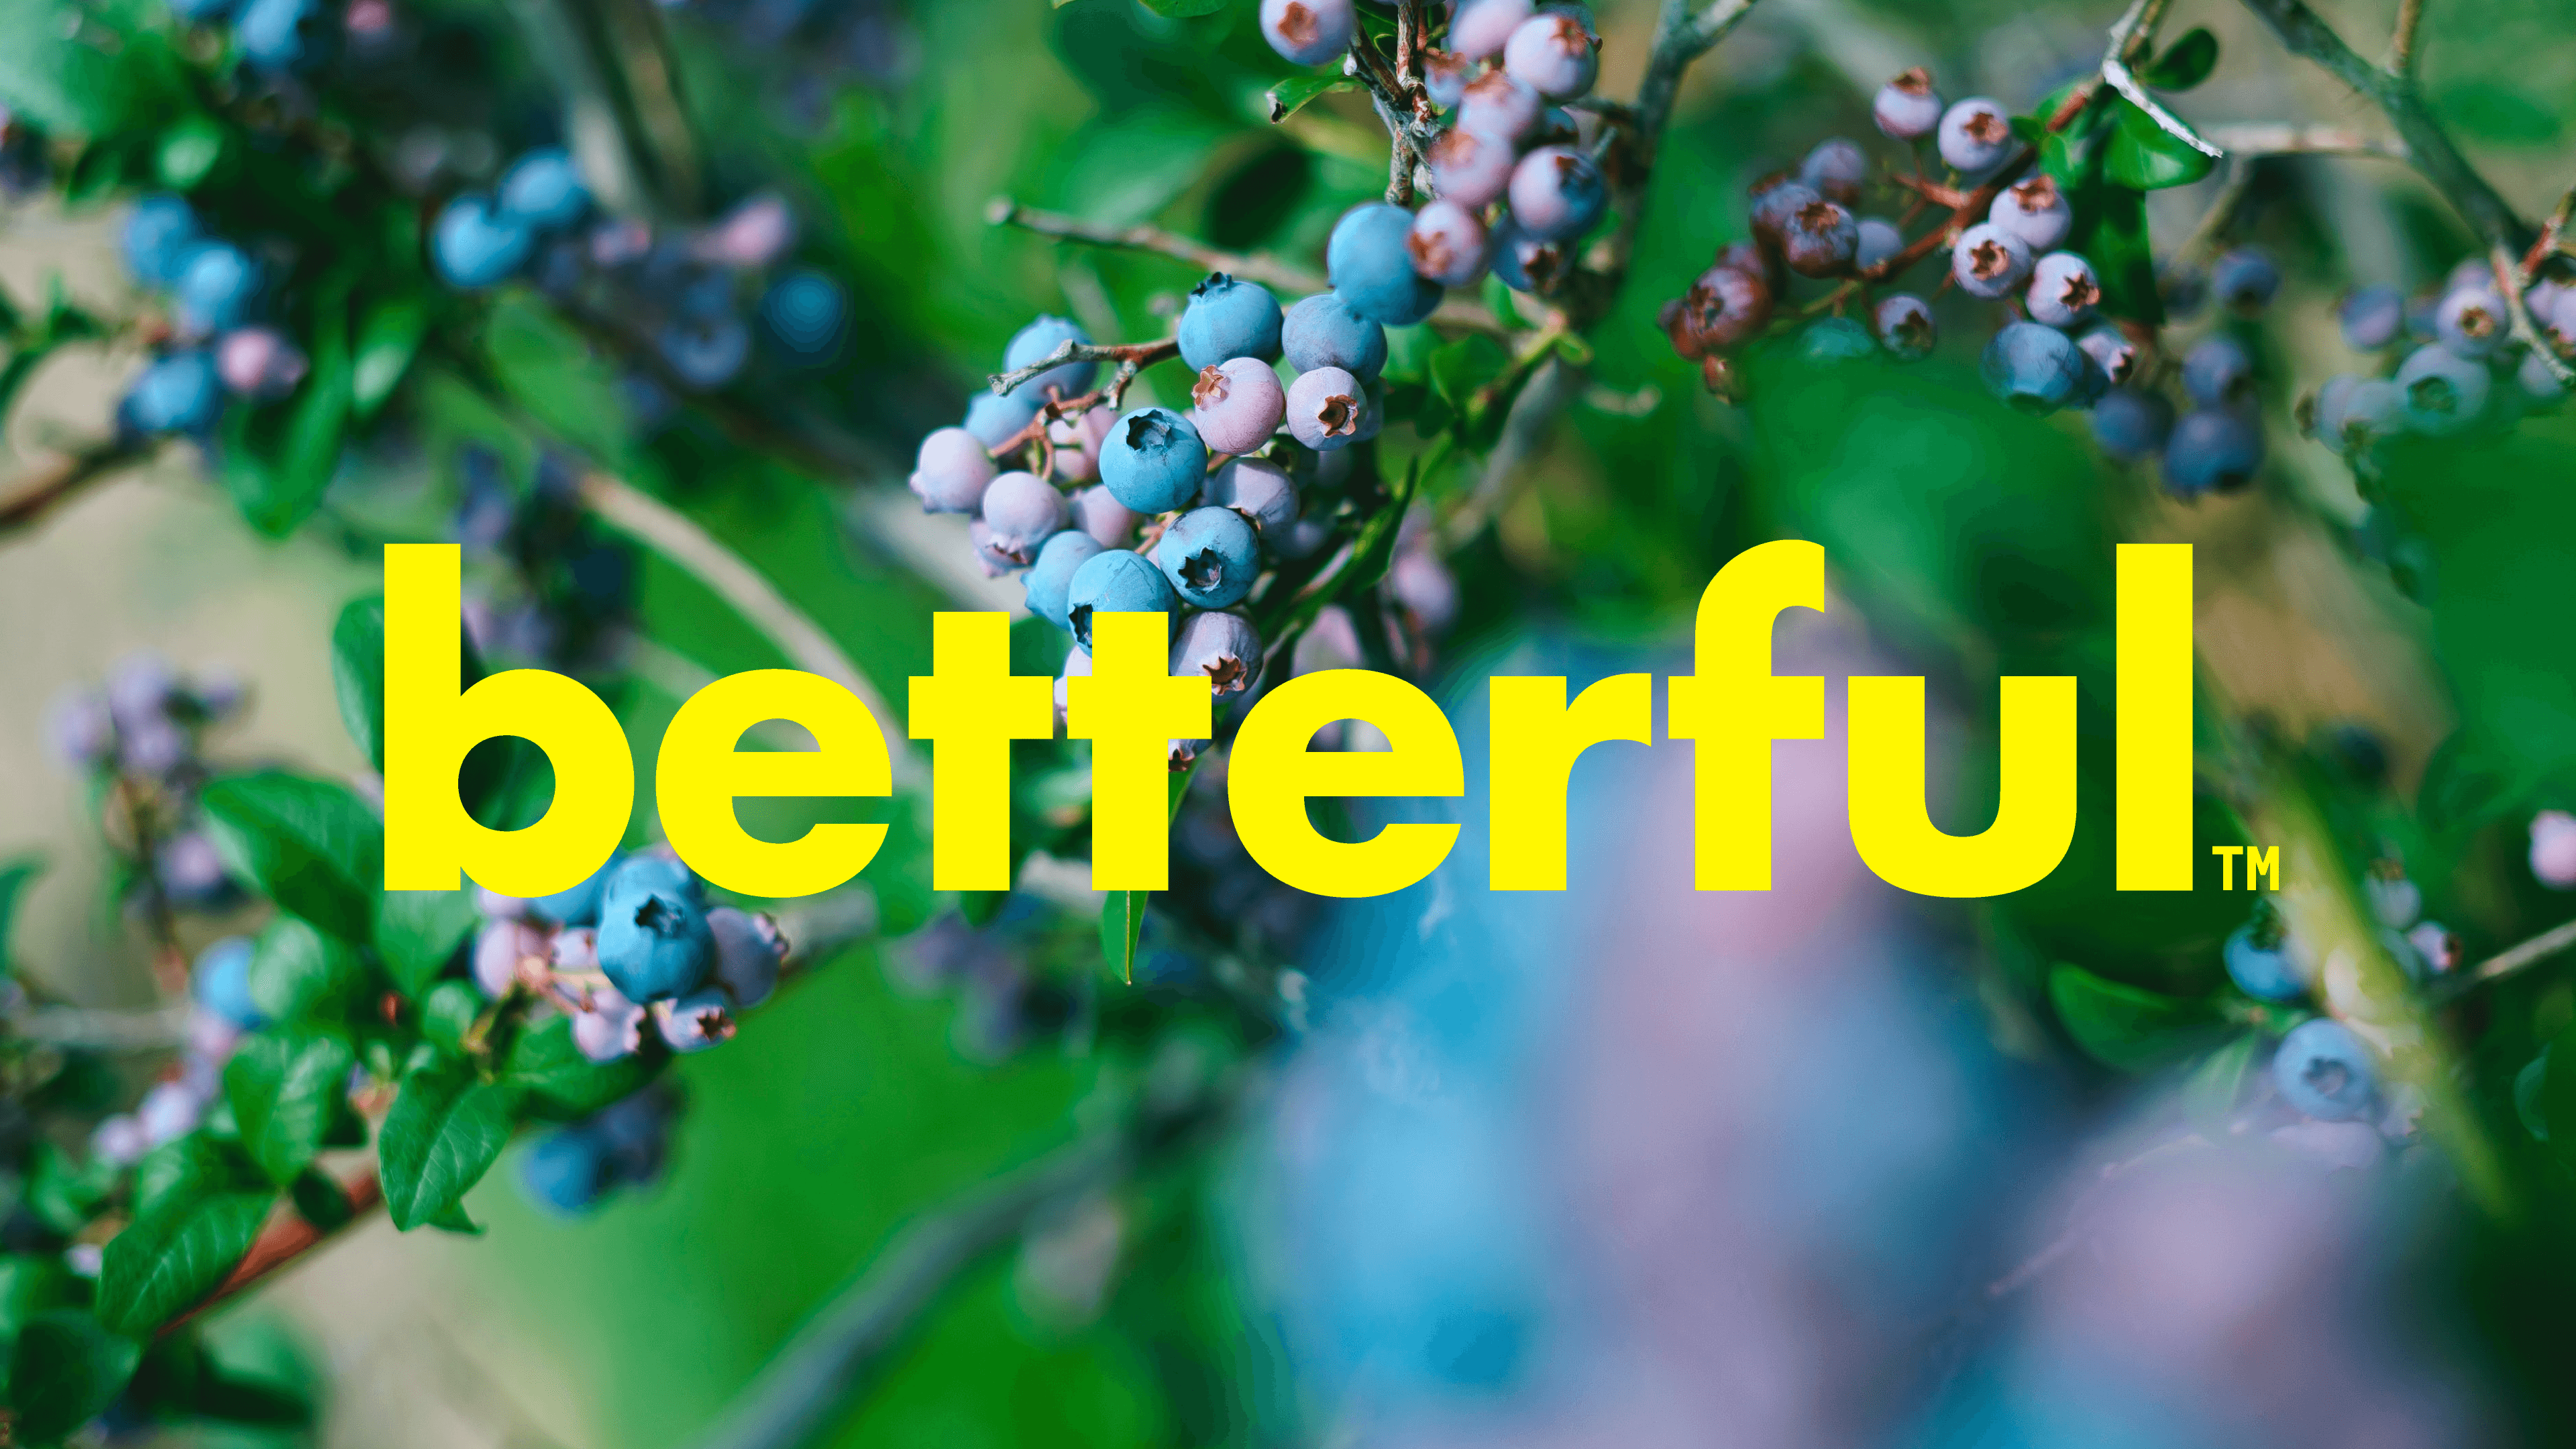 SBC_betterful_01_Cover-2